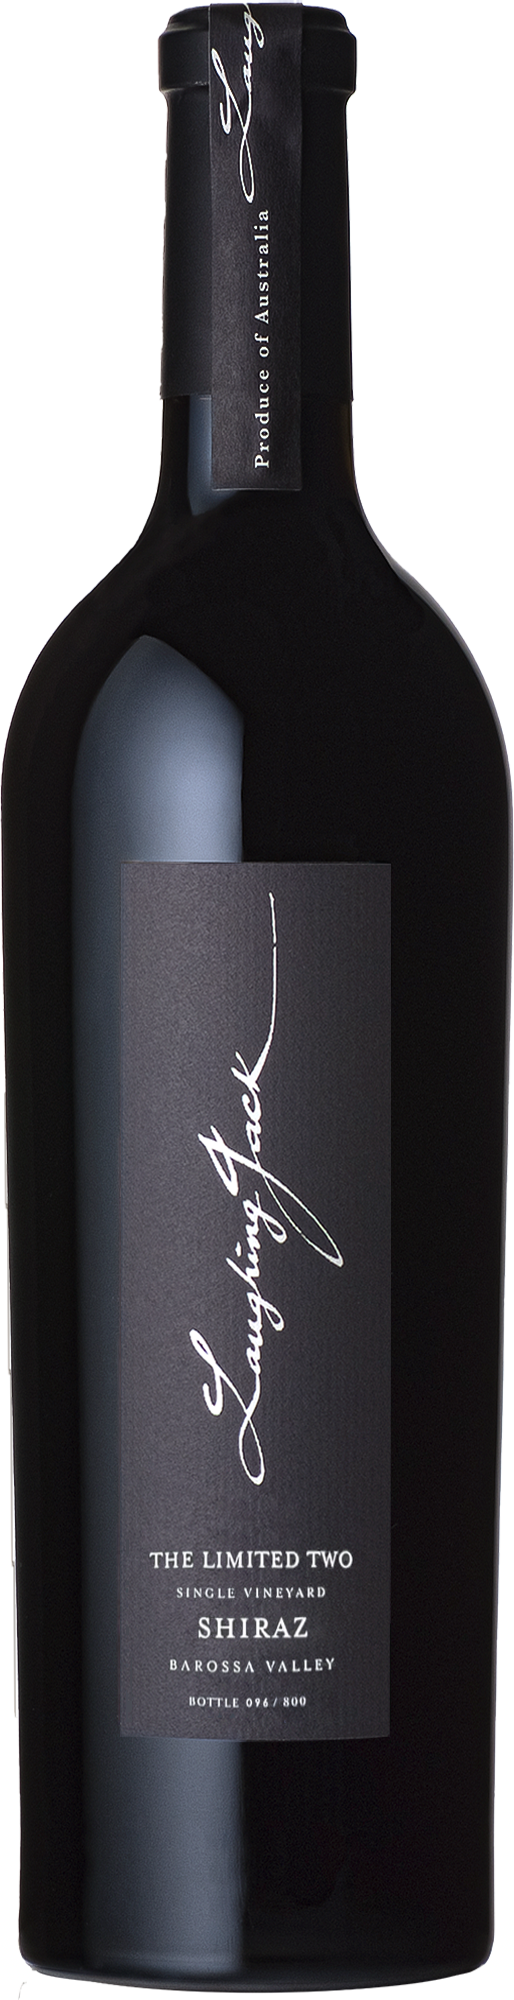 Laughing Jack The Limited Two Shiraz 2018